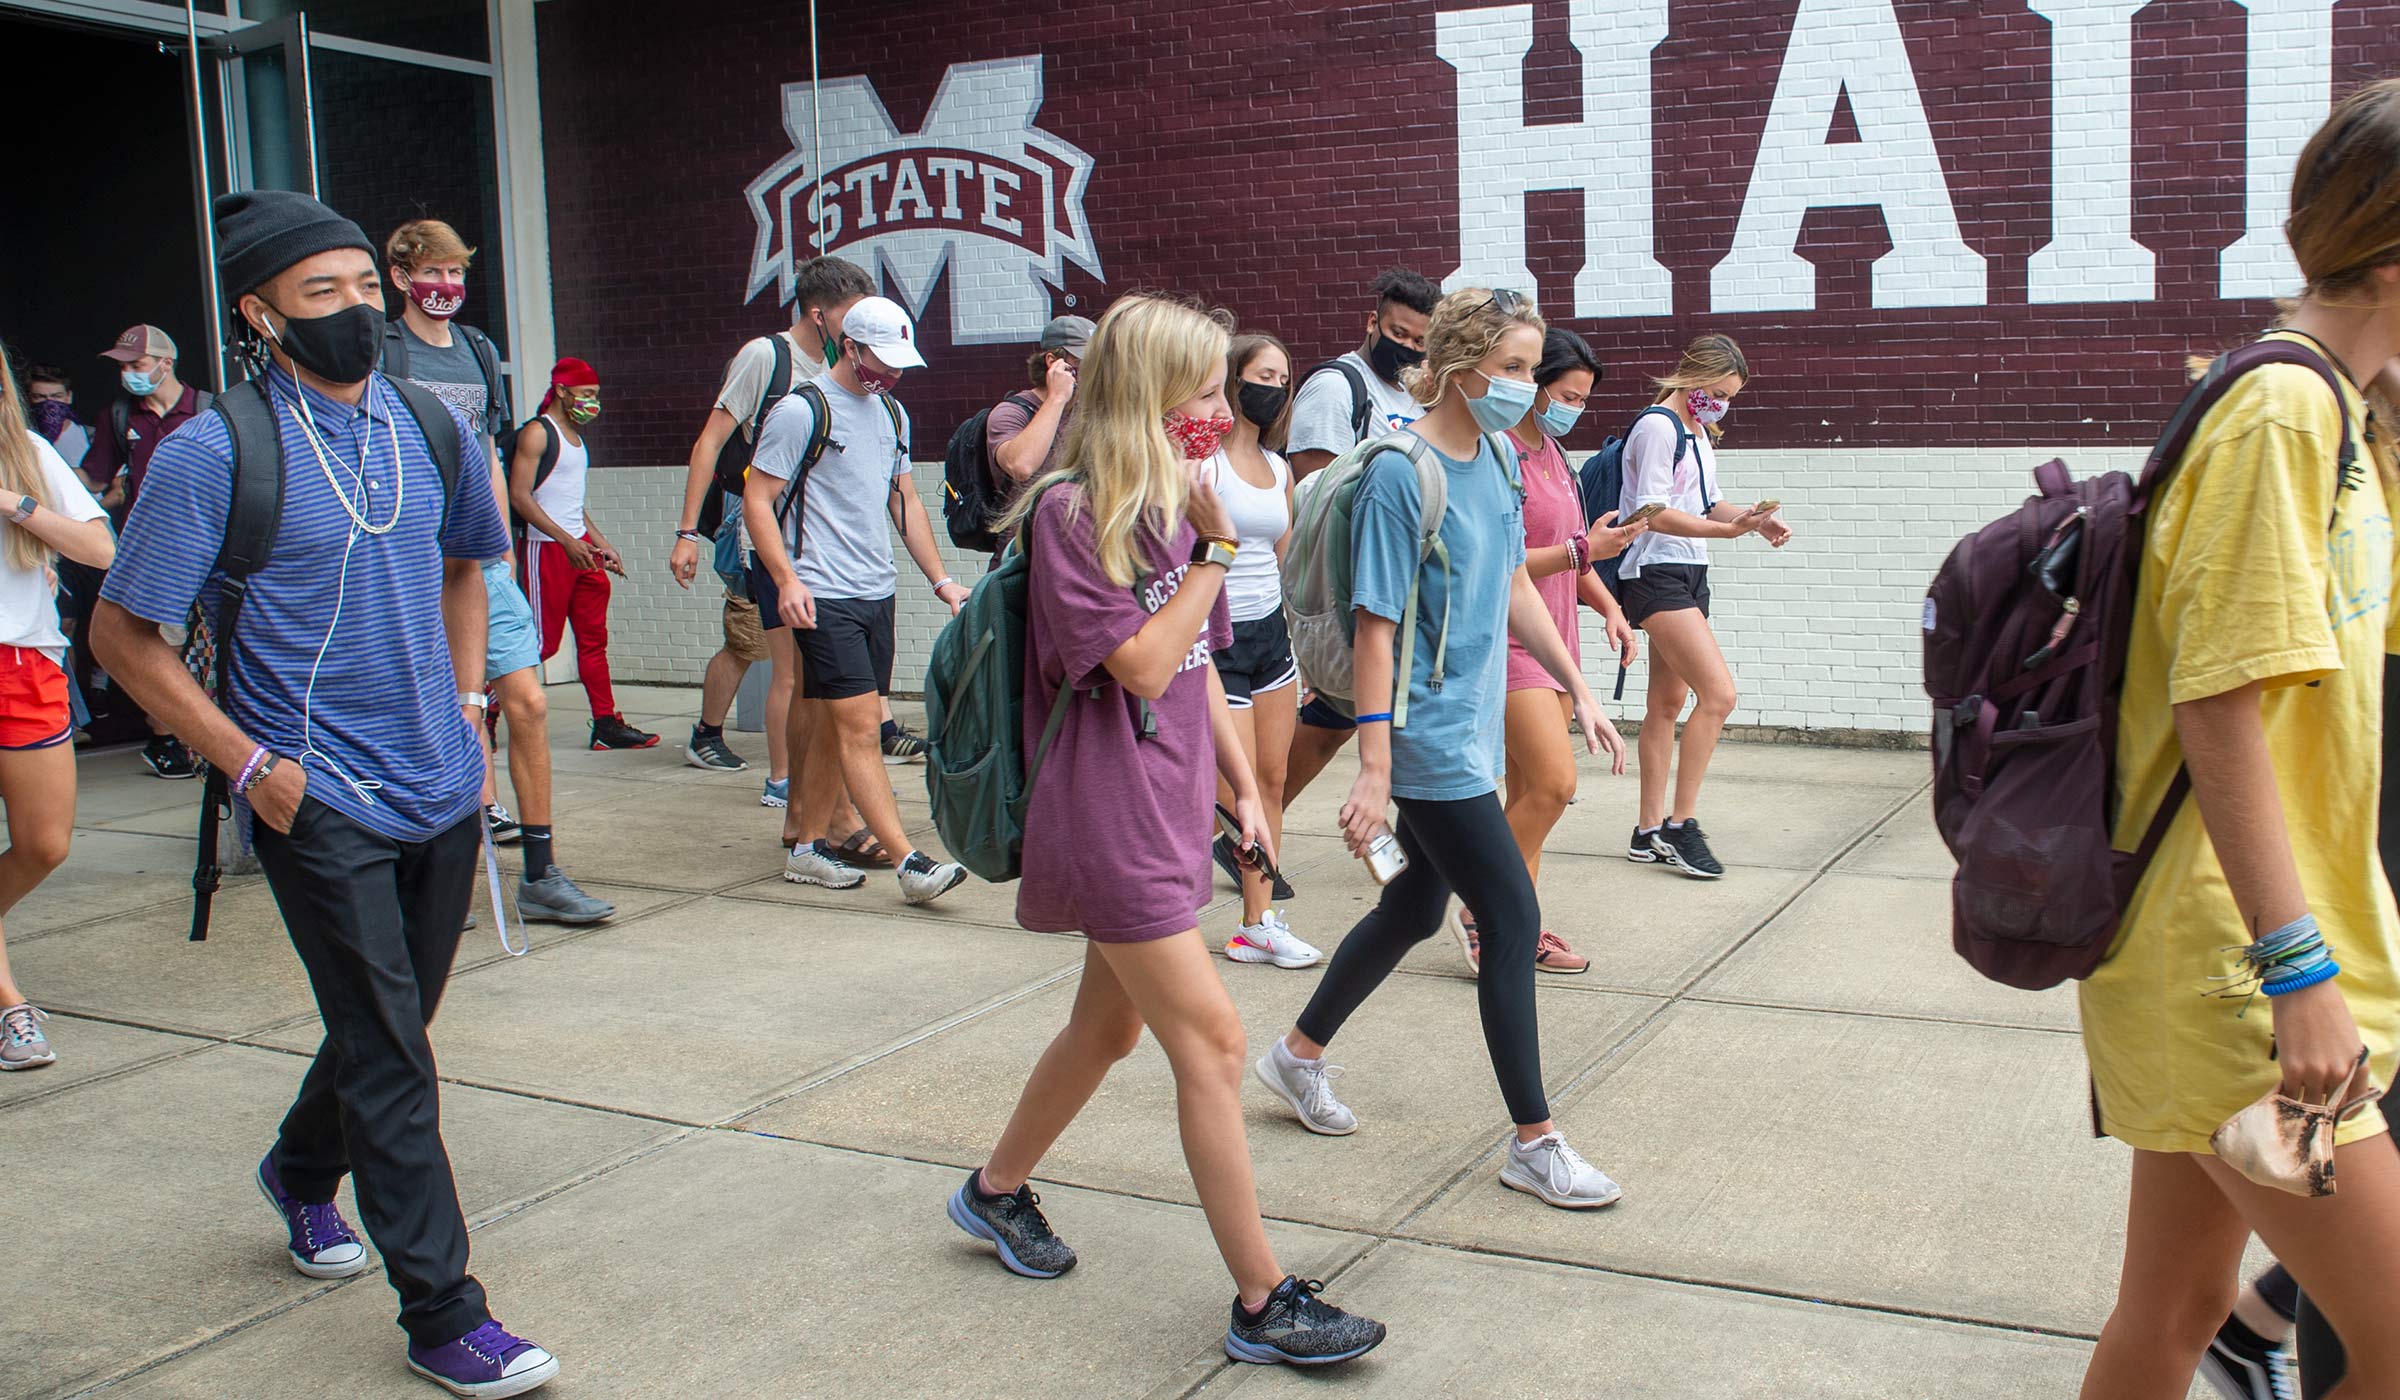 With a bit of the Hump&#039;s Hail State sign behind them, masked students exit the doors of the Mize Pavillion entrance after class.